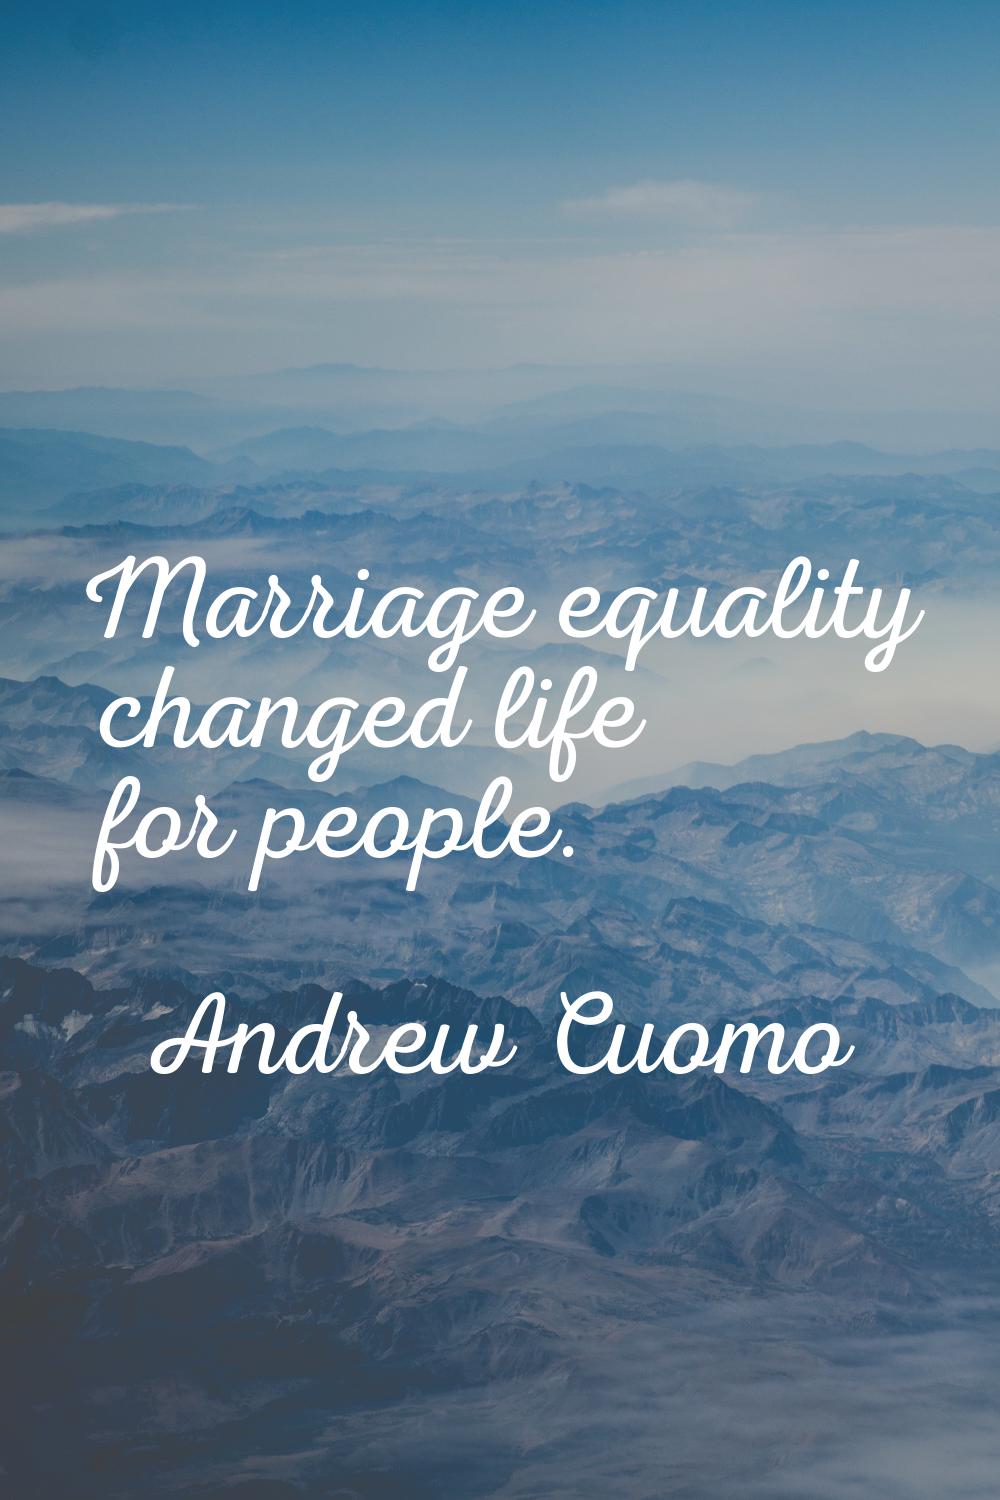 Marriage equality changed life for people.